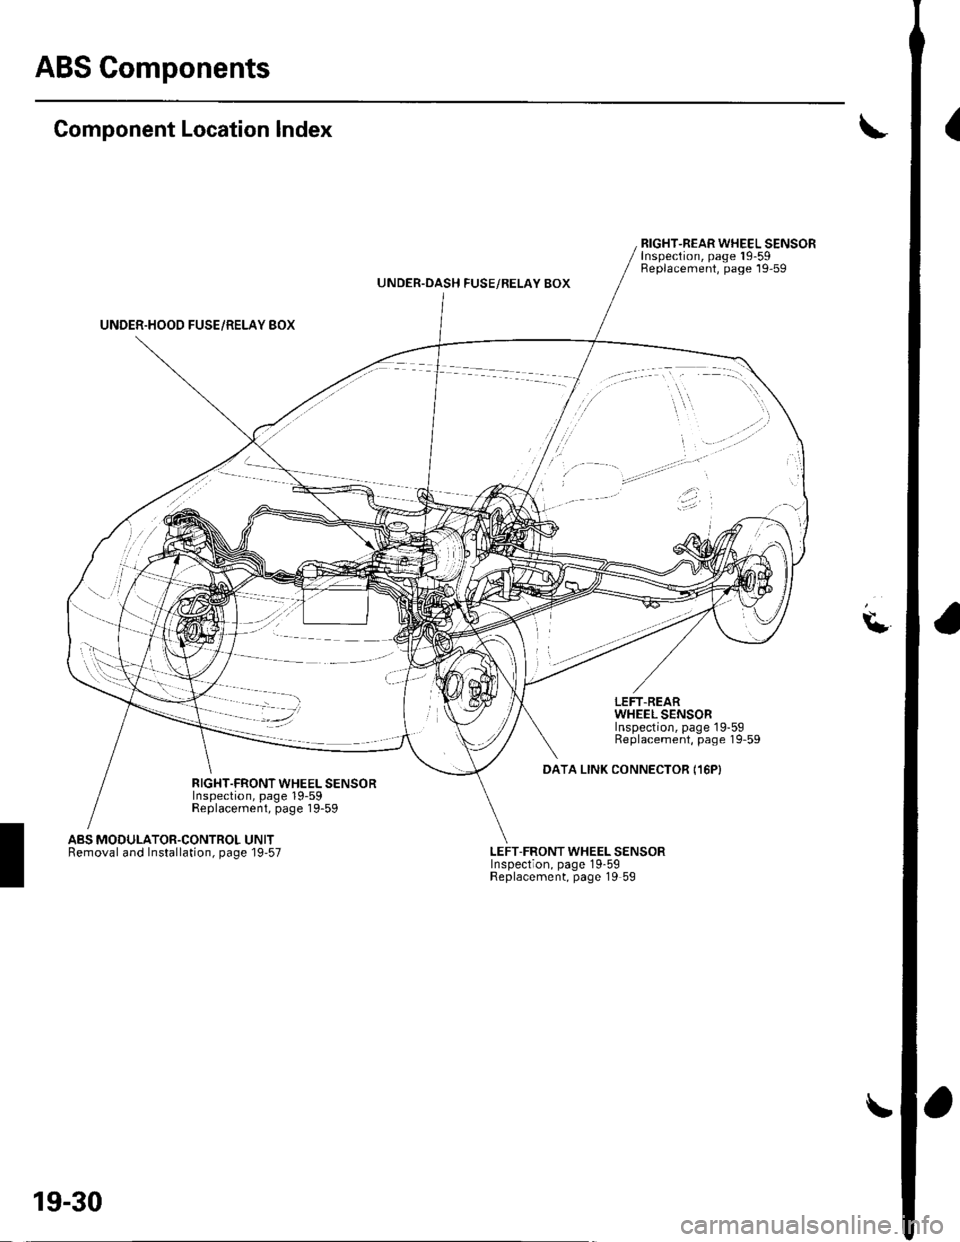 HONDA CIVIC 2002 7.G Workshop Manual ABS Gomponents
(Component Location Index
UNDER.HOOD FUSE/RELAY BOX
RIGHT-REAR WHEEL SENSORInspection, page 19-59Replacement, page 19-59UNDER.OASH FUSE/RELAY BOX
\L
LEFT.REARWHEEL SENSORInspection, pag